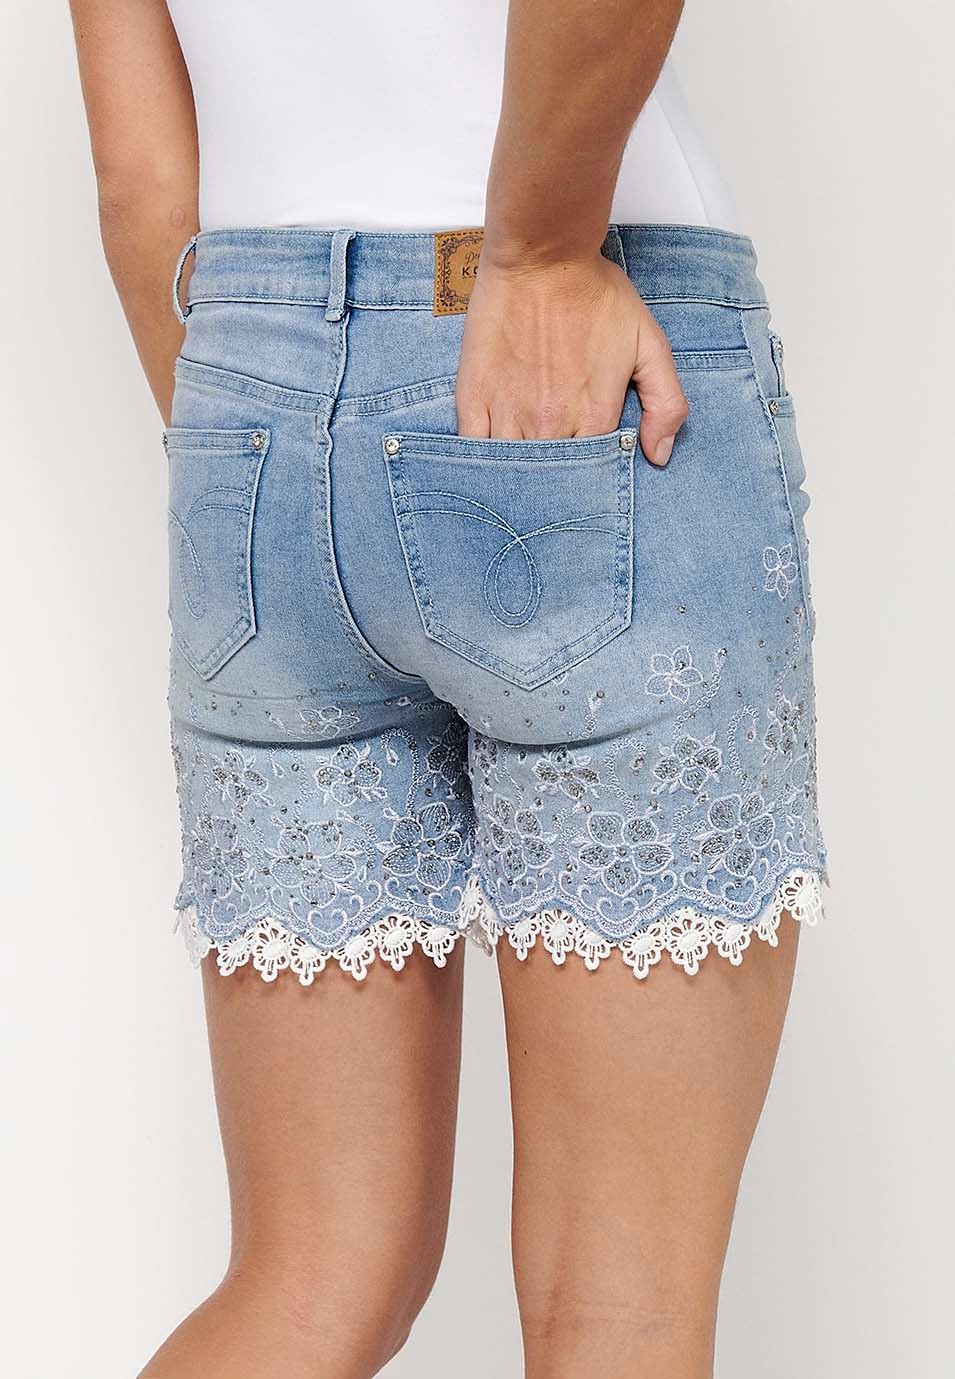 Short denim shorts finished with lace and floral embroidery with front closure with zipper and button with removable bow detail in Blue for Women 1